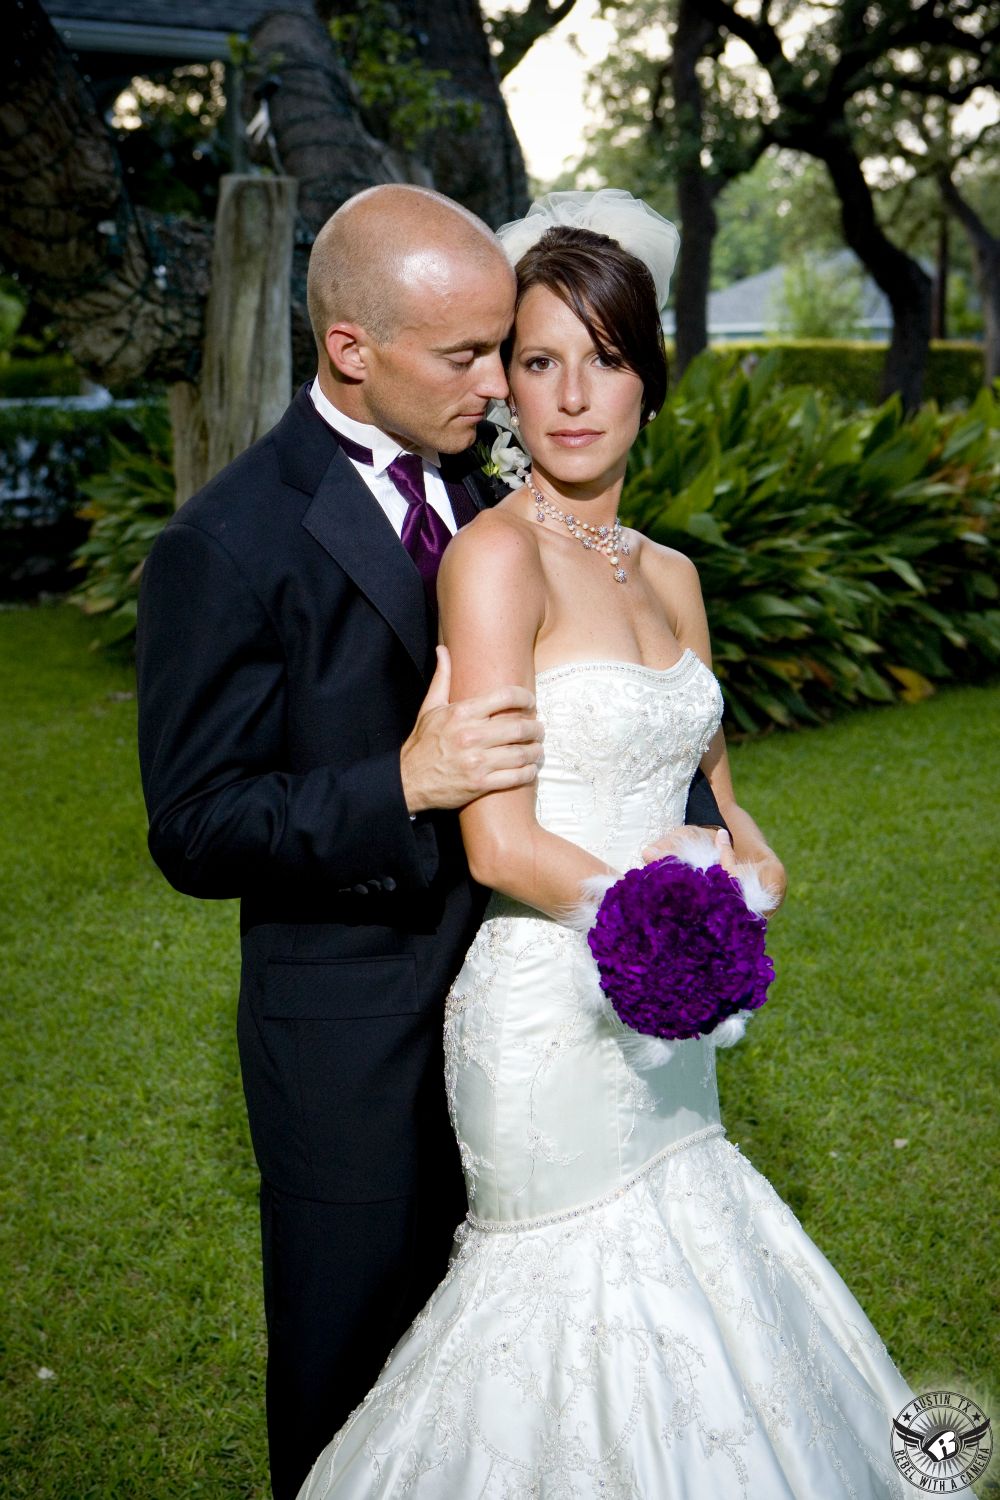 Groom with shaved head in black tuxedo and deep eggplant colored necktie nuzzles bride in elegant strapless mermaid wedding gown with purple carnation and white feather bridal bouquet at Green Pastures Austin wedding venue.